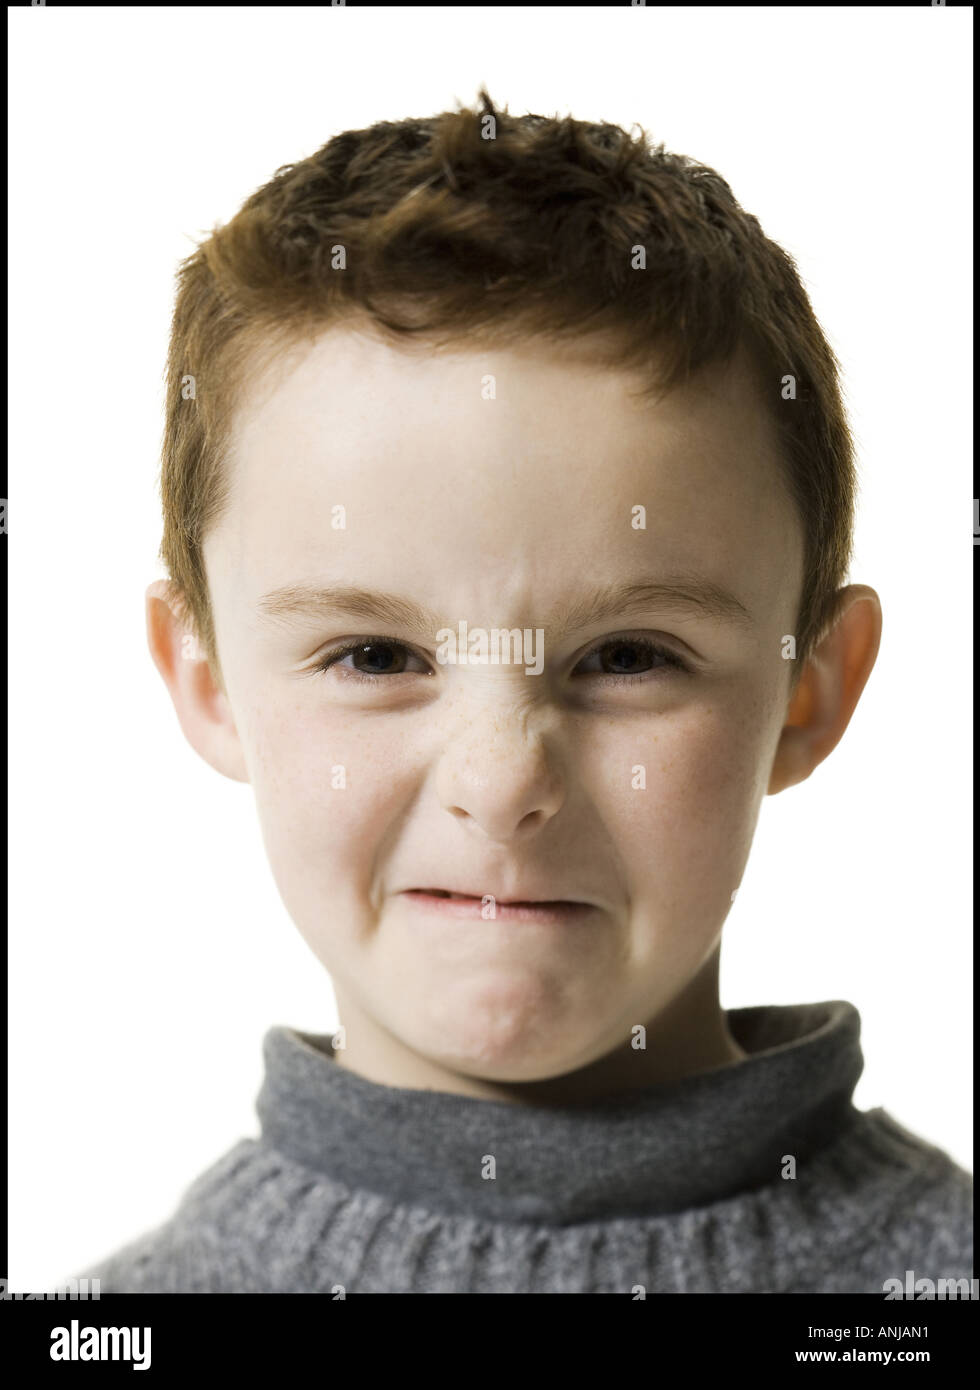 Portrait of a boy making a face Stock Photo